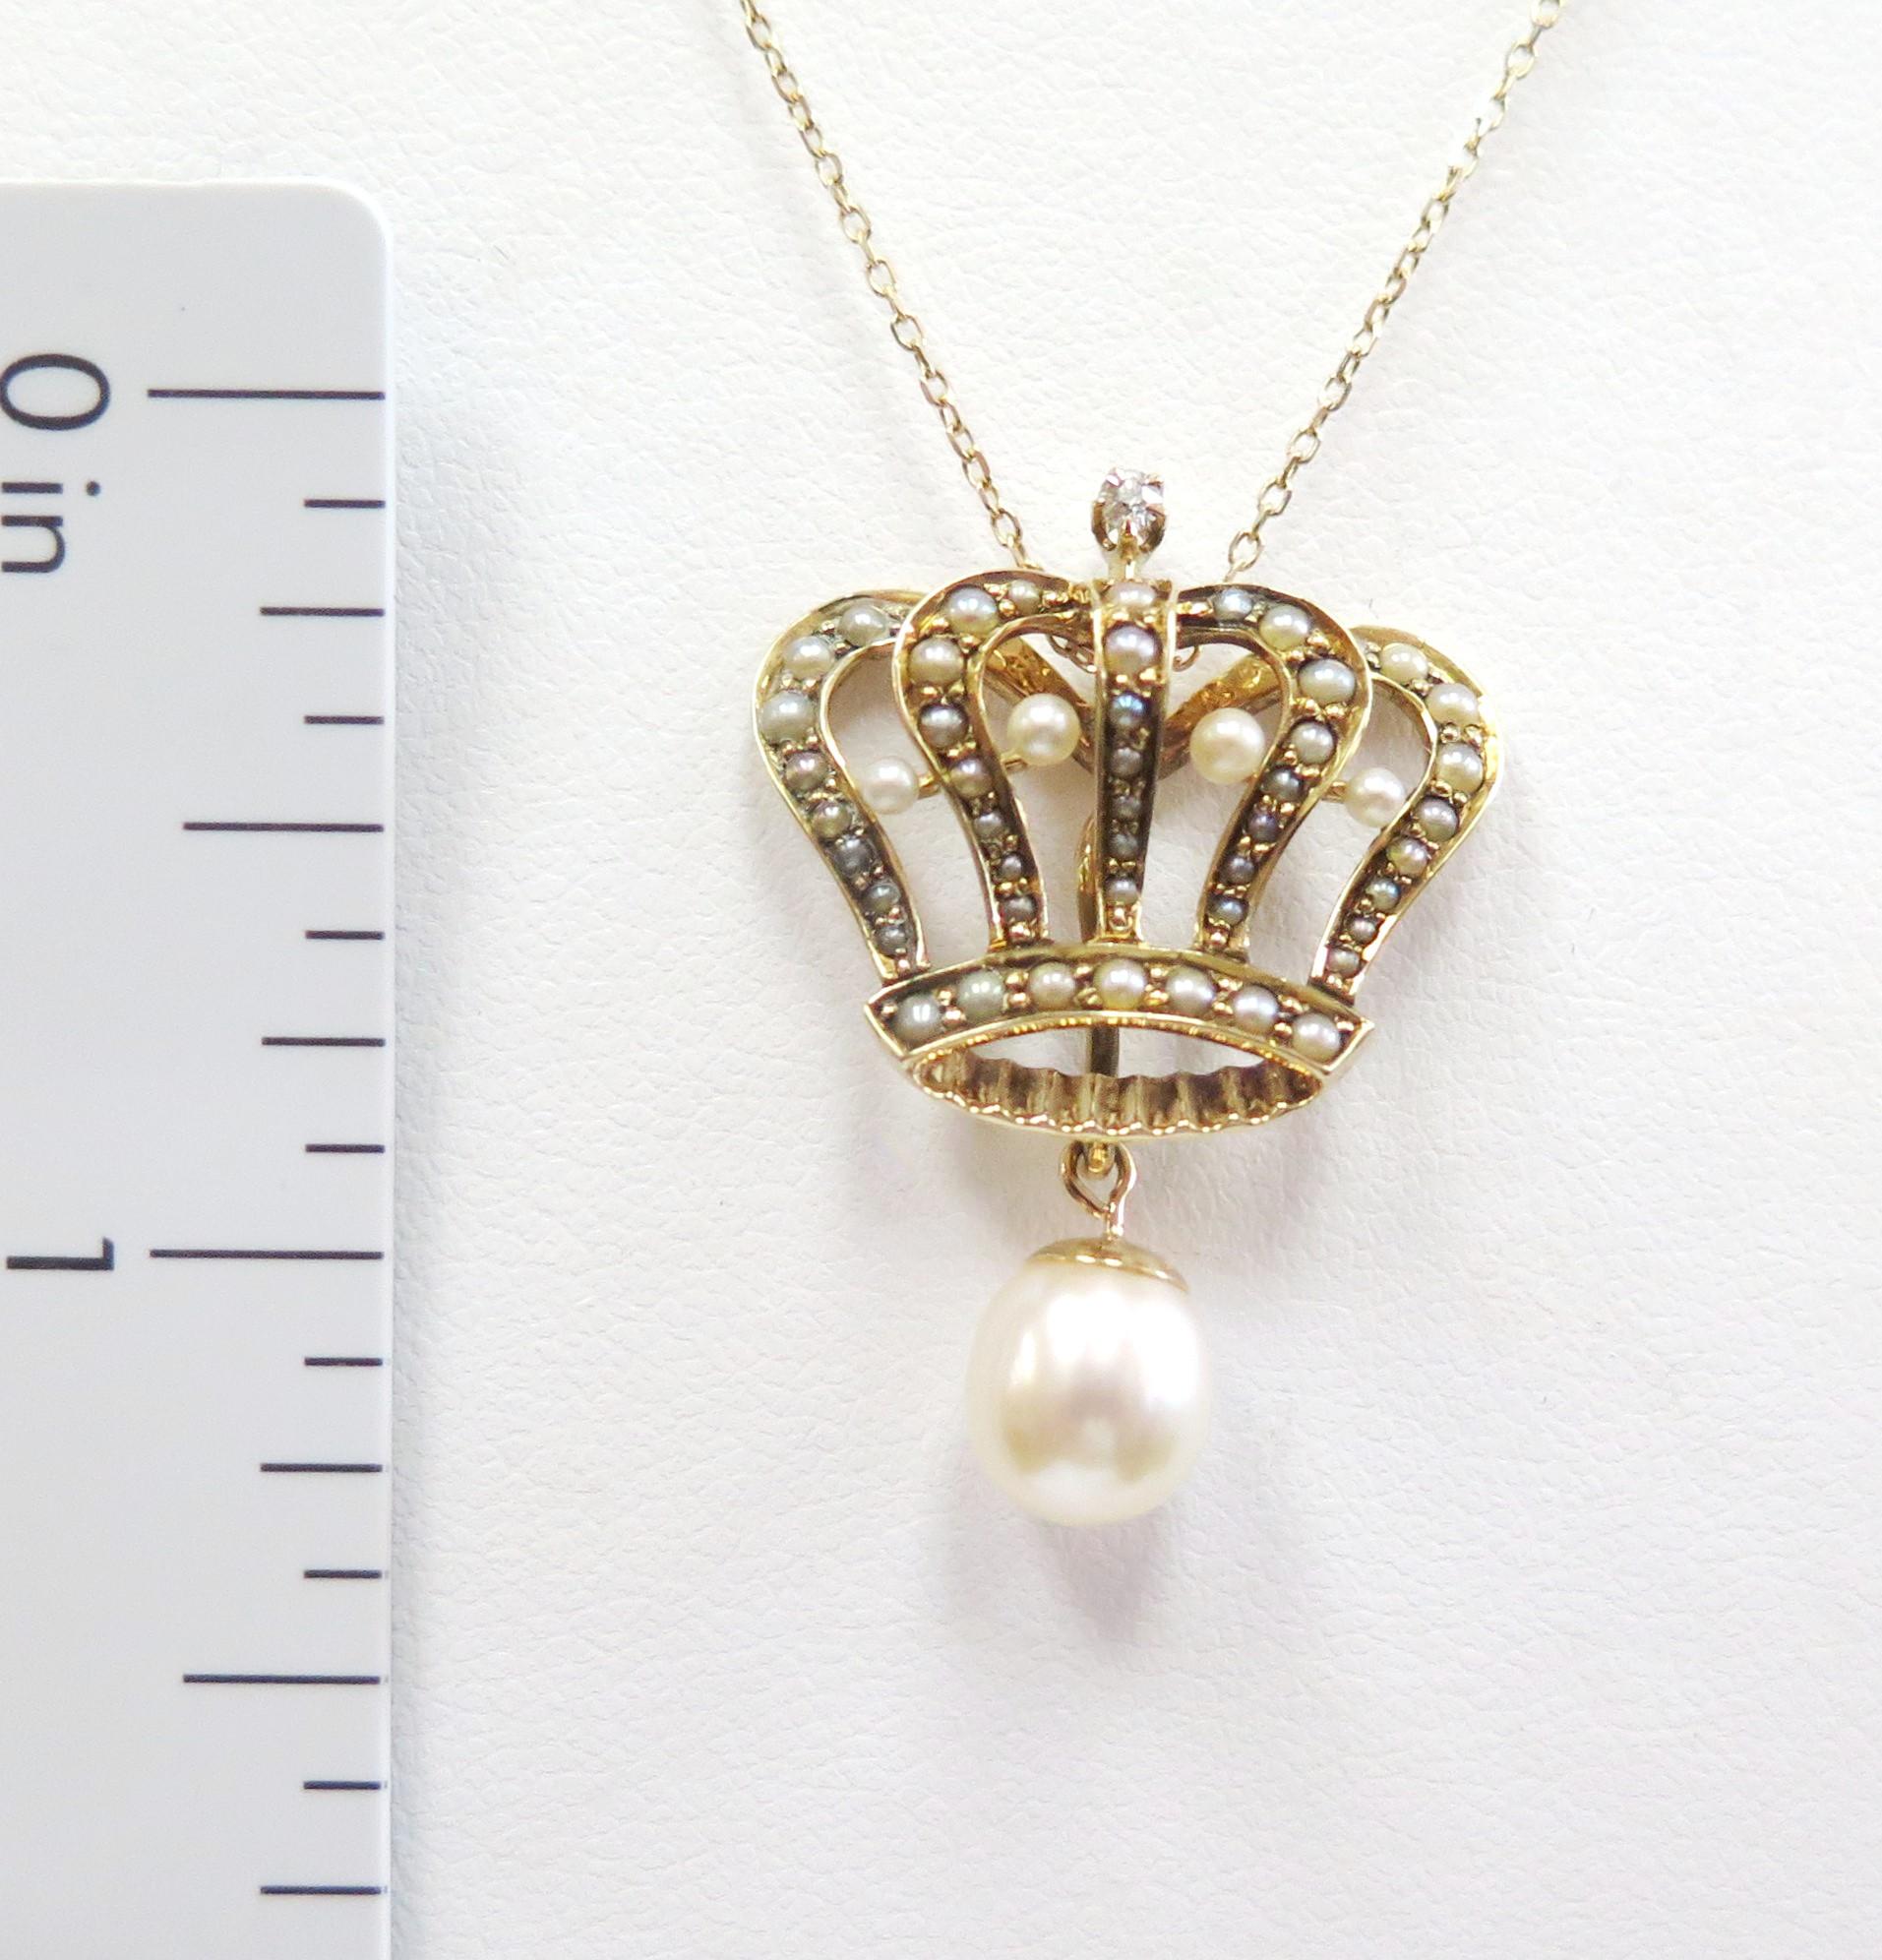 This is a stunning antique 14 karat yellow gold crown pendant. The finely made piece was once a pin that our jeweler converted into a beautiful pendant. This dainty royal charm is embellished with many tiny seed pearls, and 4 larger seed pearls. A